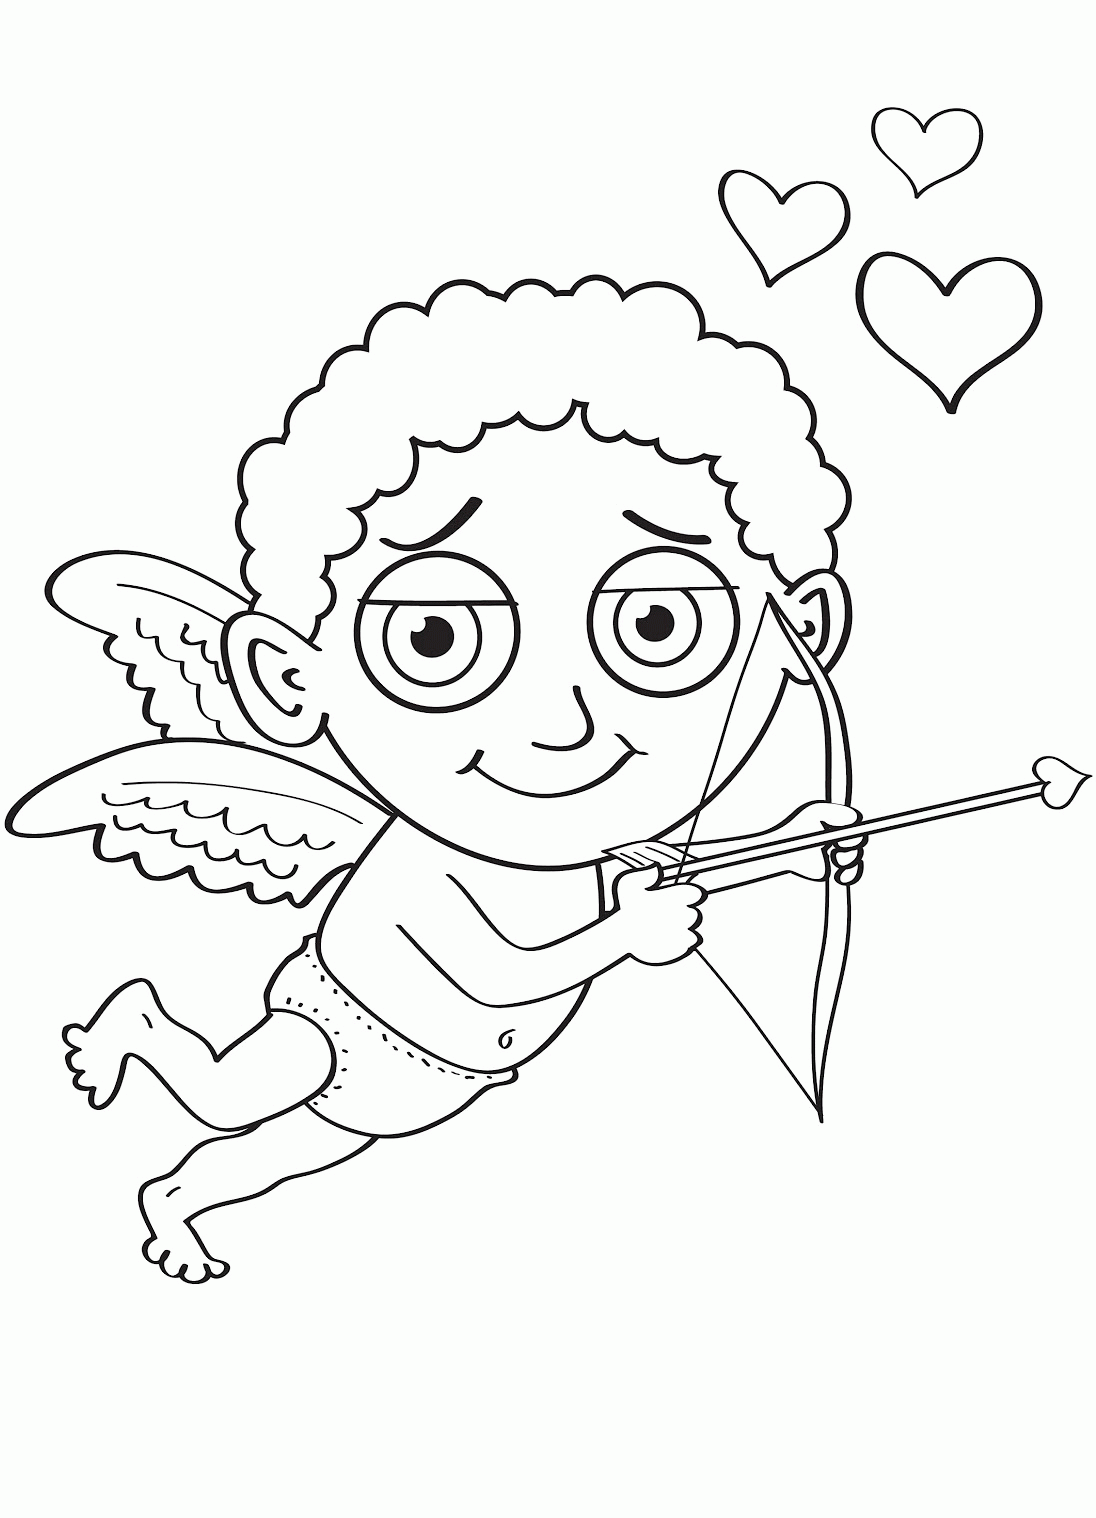 Printable Cupid Coloring Pictures| Coloring Pages for Kids #cAz